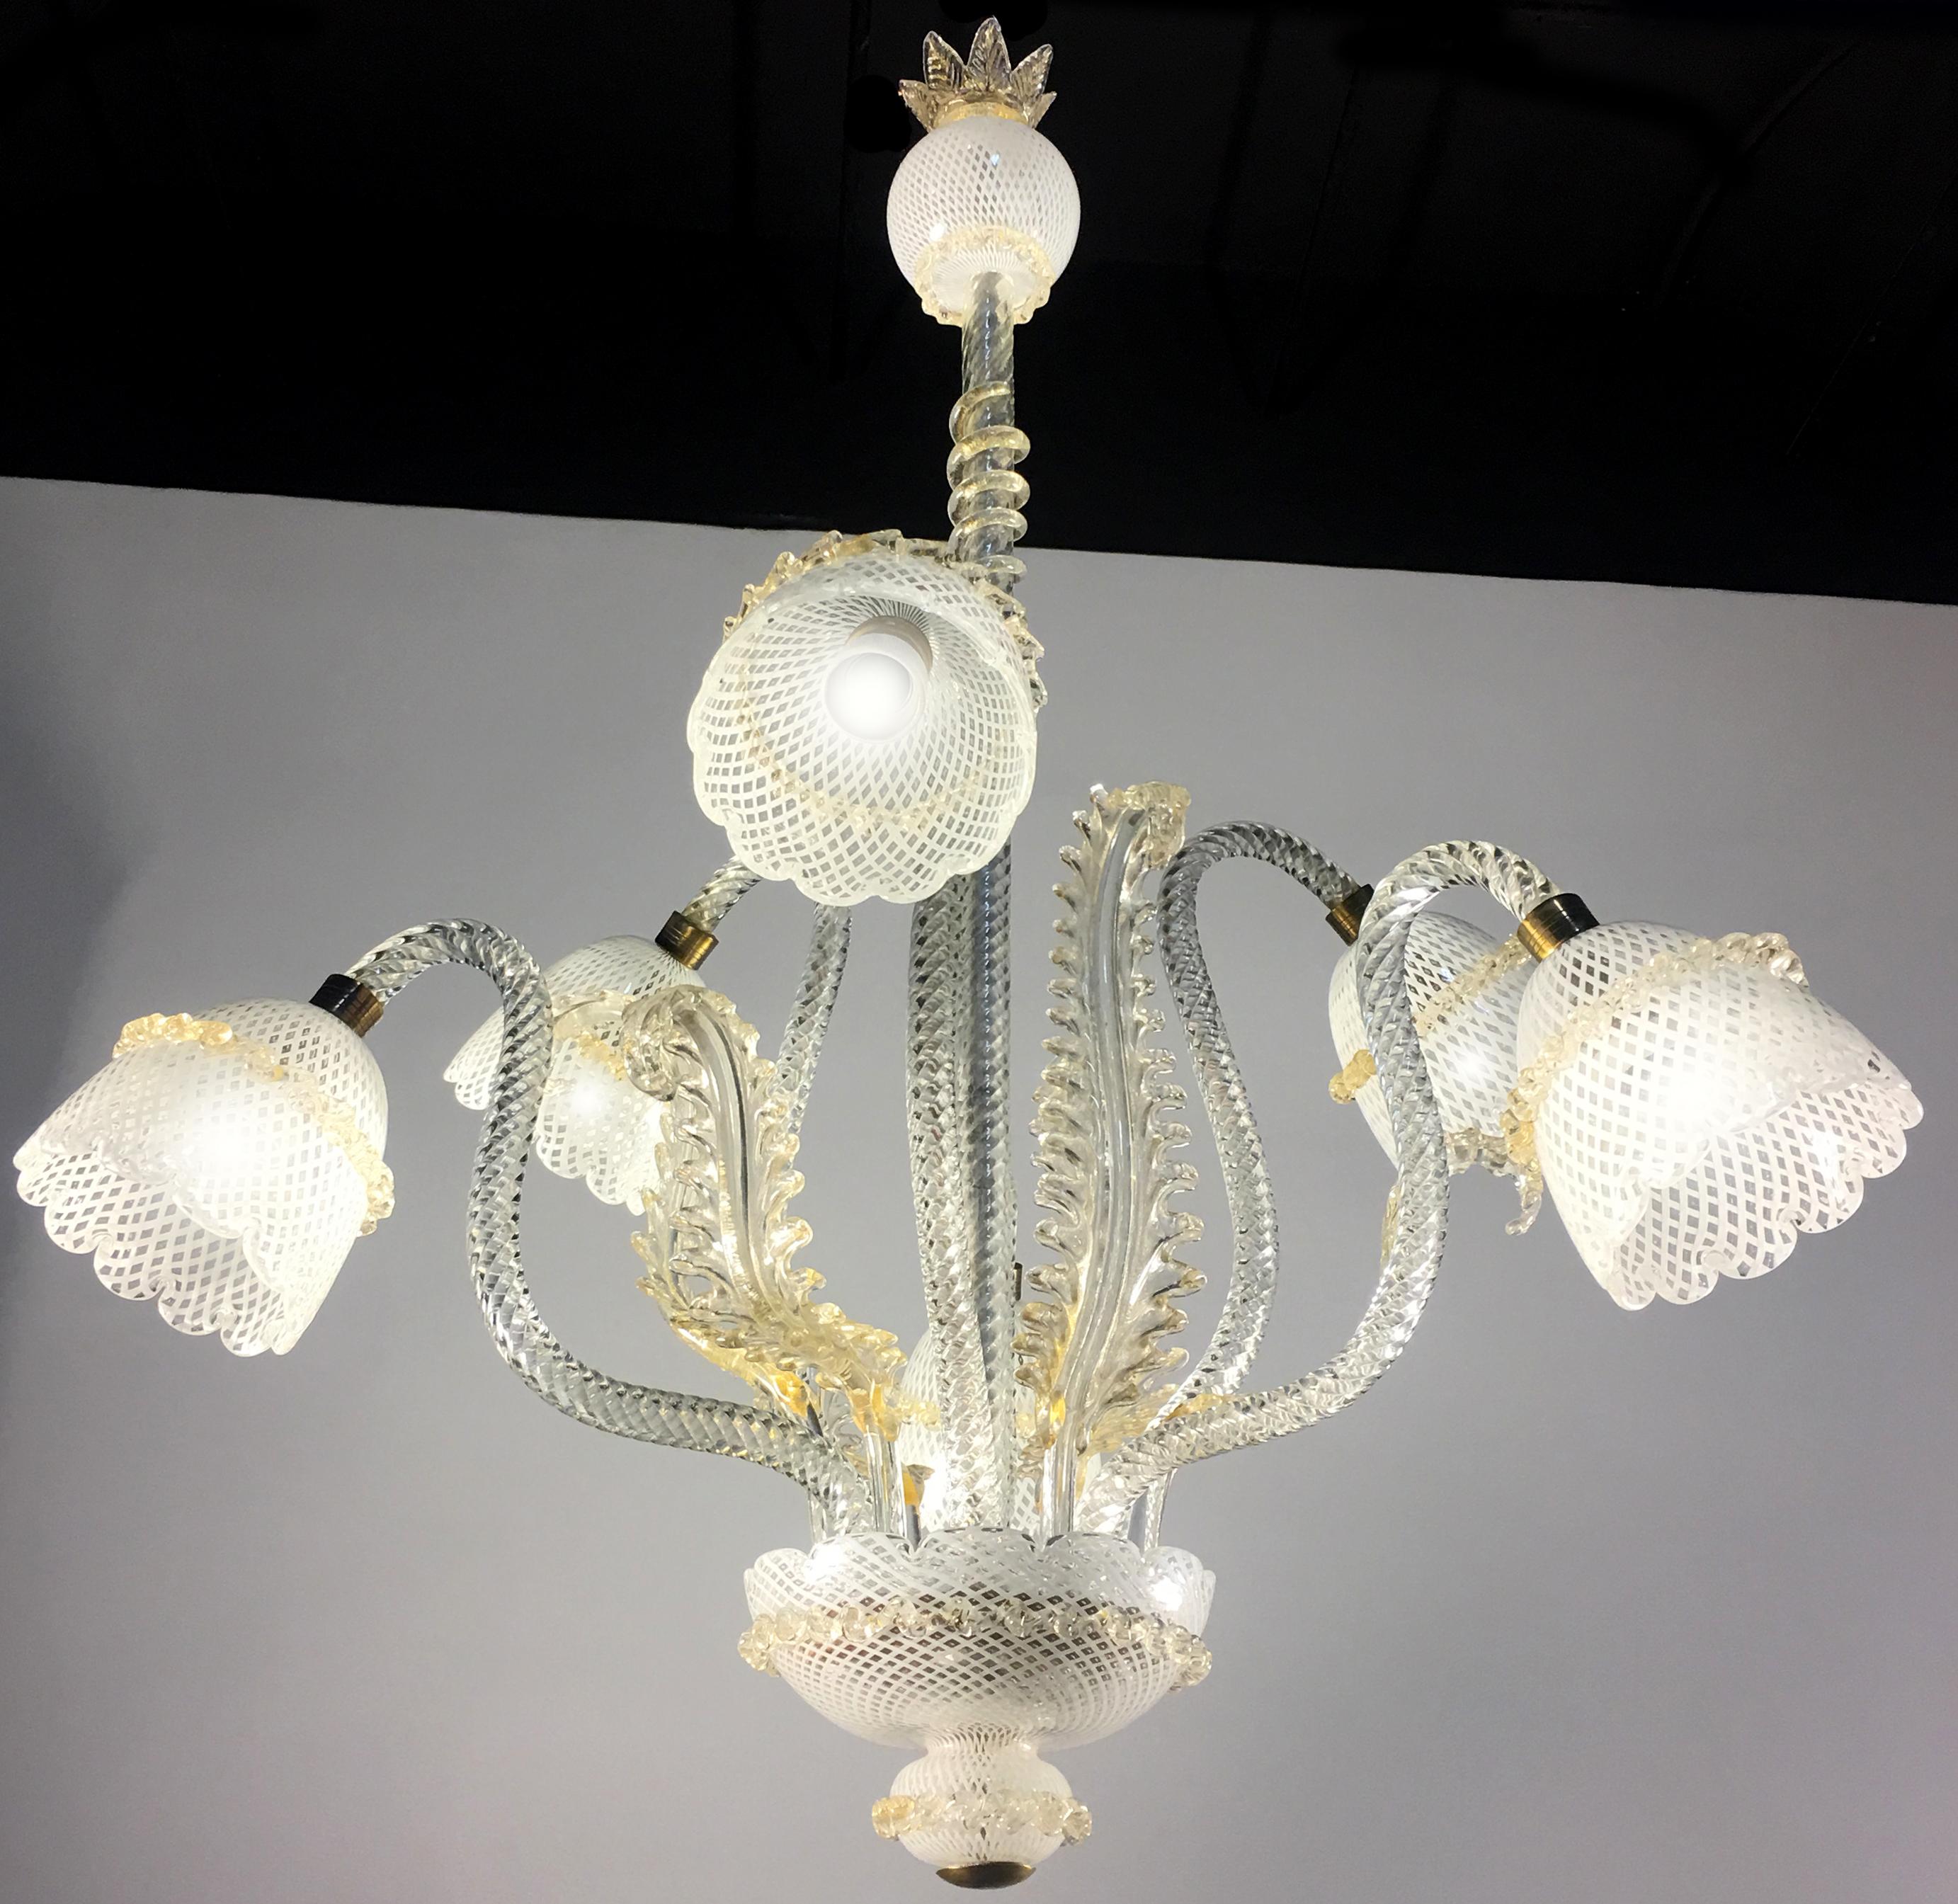 Six-arm chandelier gold inclusions, Italy. Hand blown glass using the ‘Reticello’ technique.